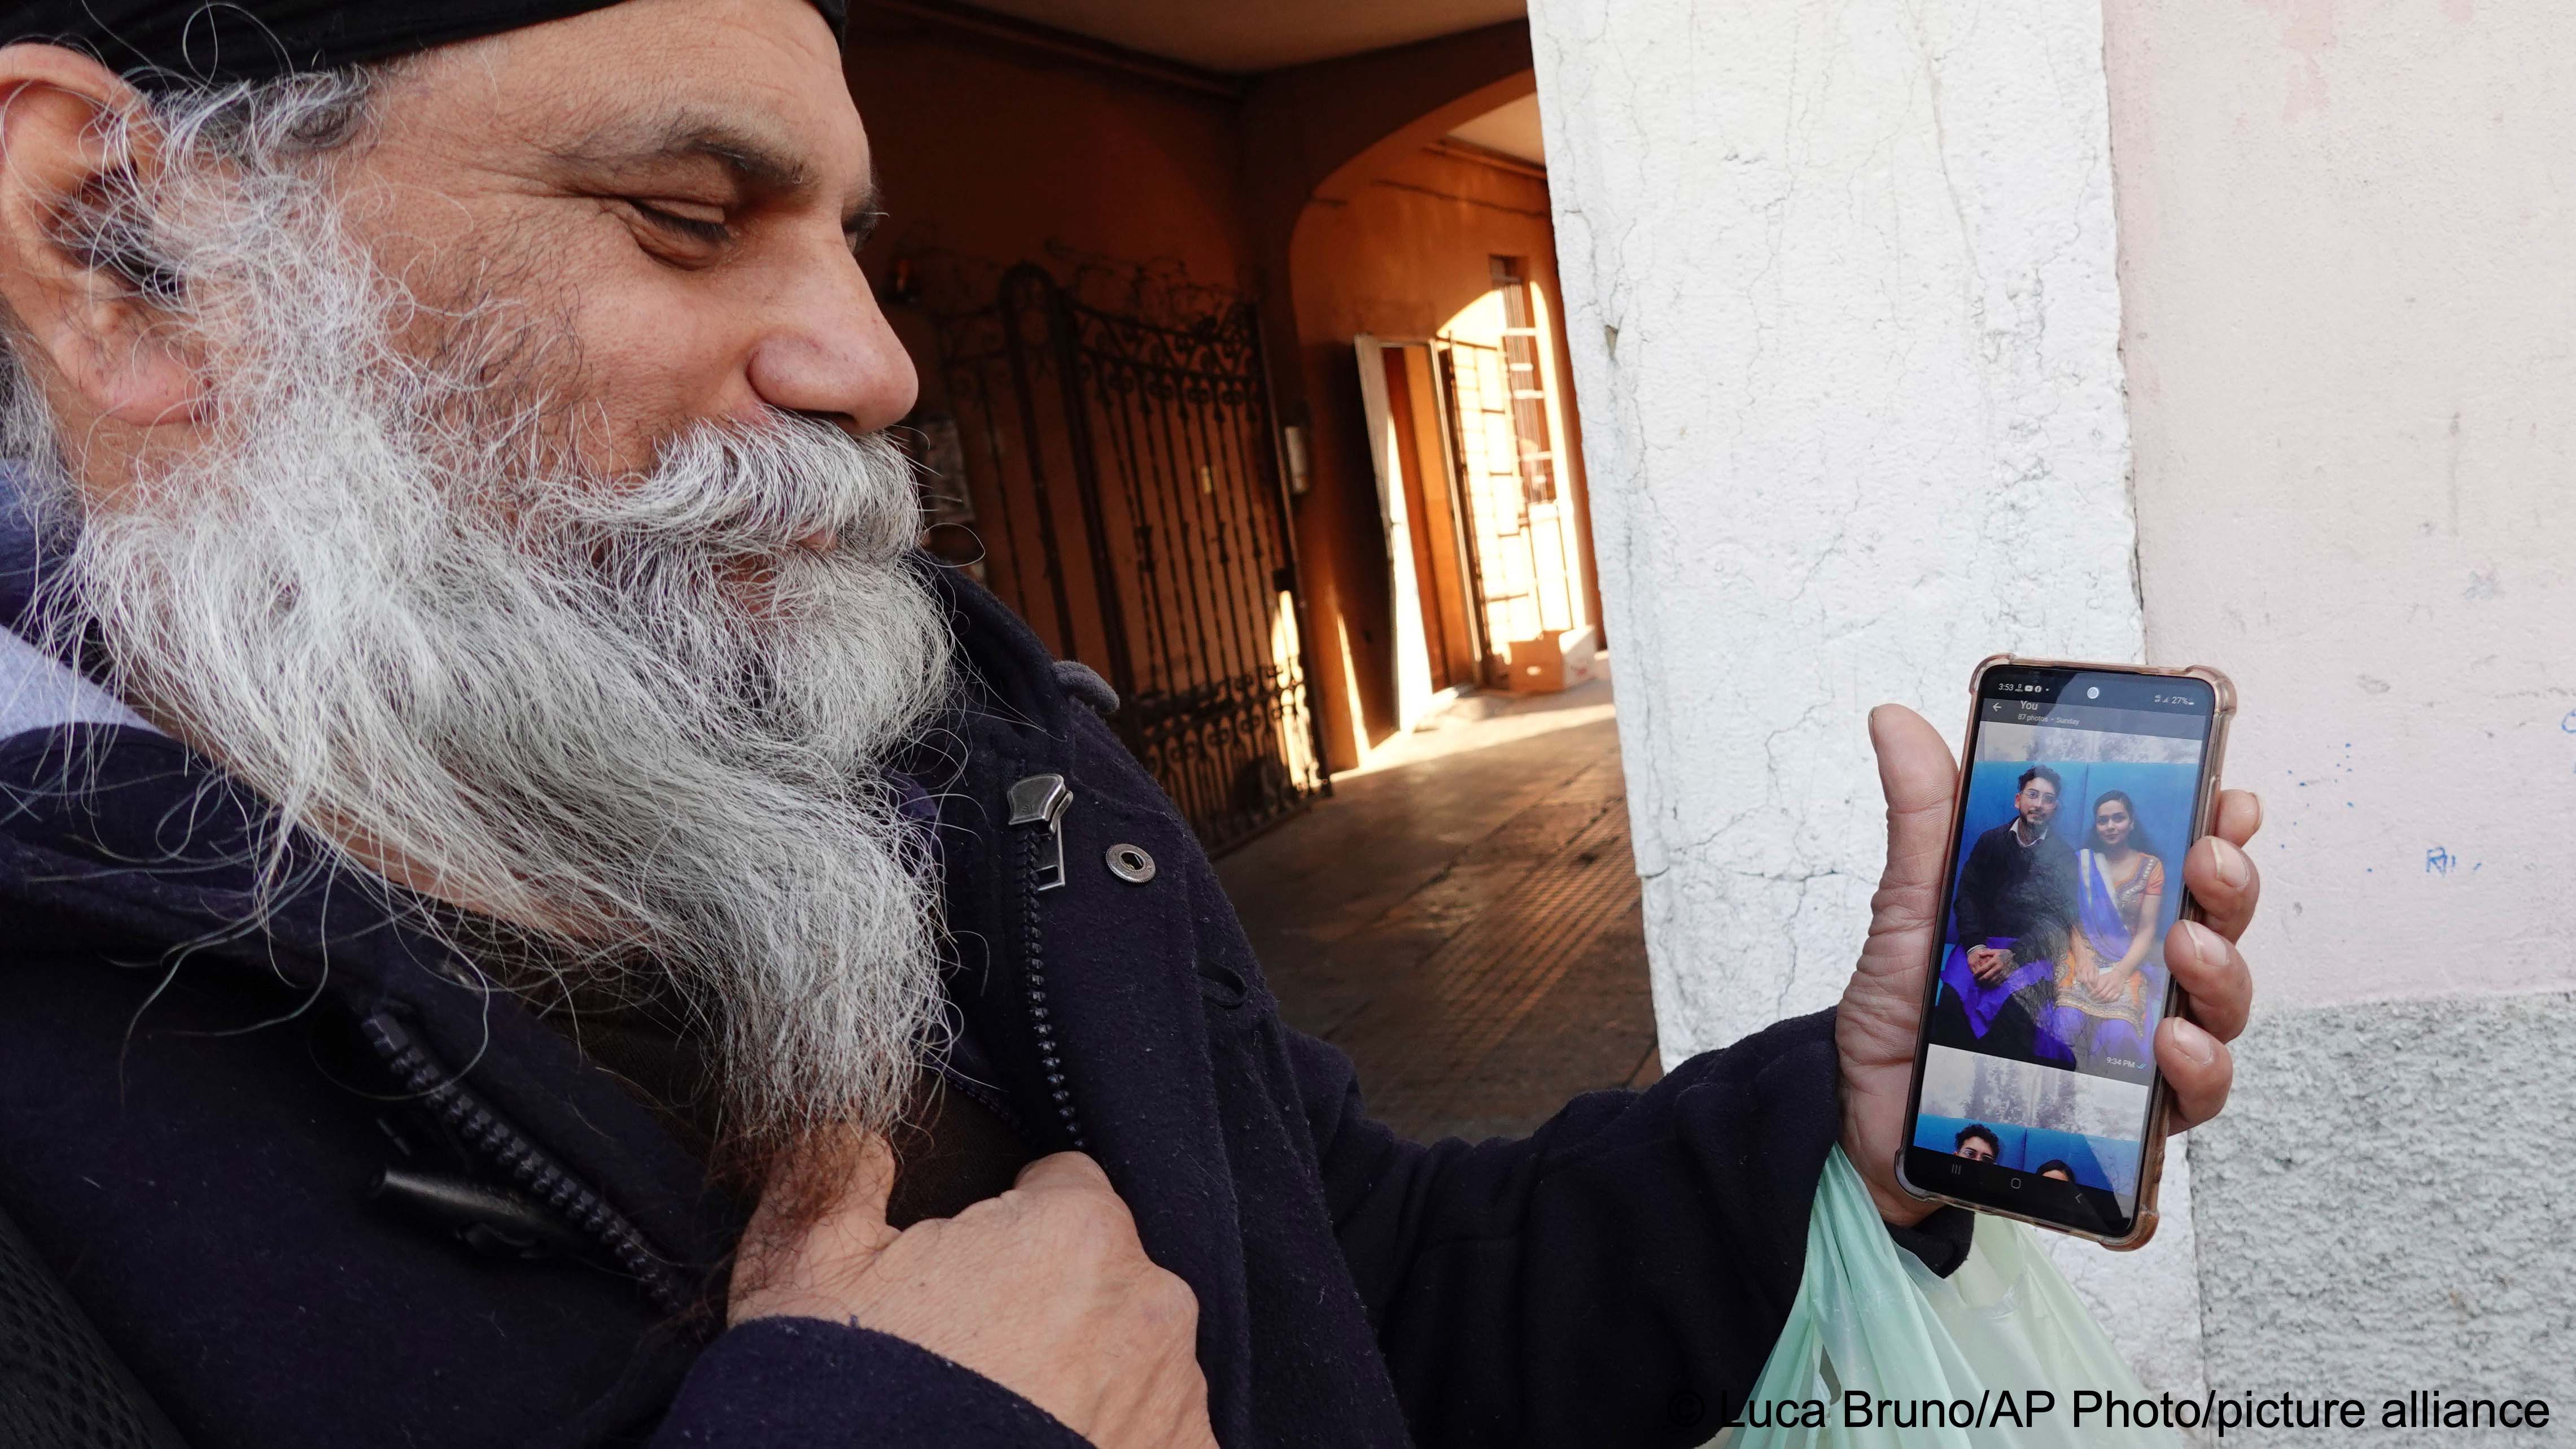 Swaranjit Singh Ghotra, photographer and wedding planner for Indian and Pakistani couples shows pictures of married couples from his Instagram account, in Brescia, Italy, 8 February 2022 (image: Luca Bruno/AP Photo/picture alliance) 